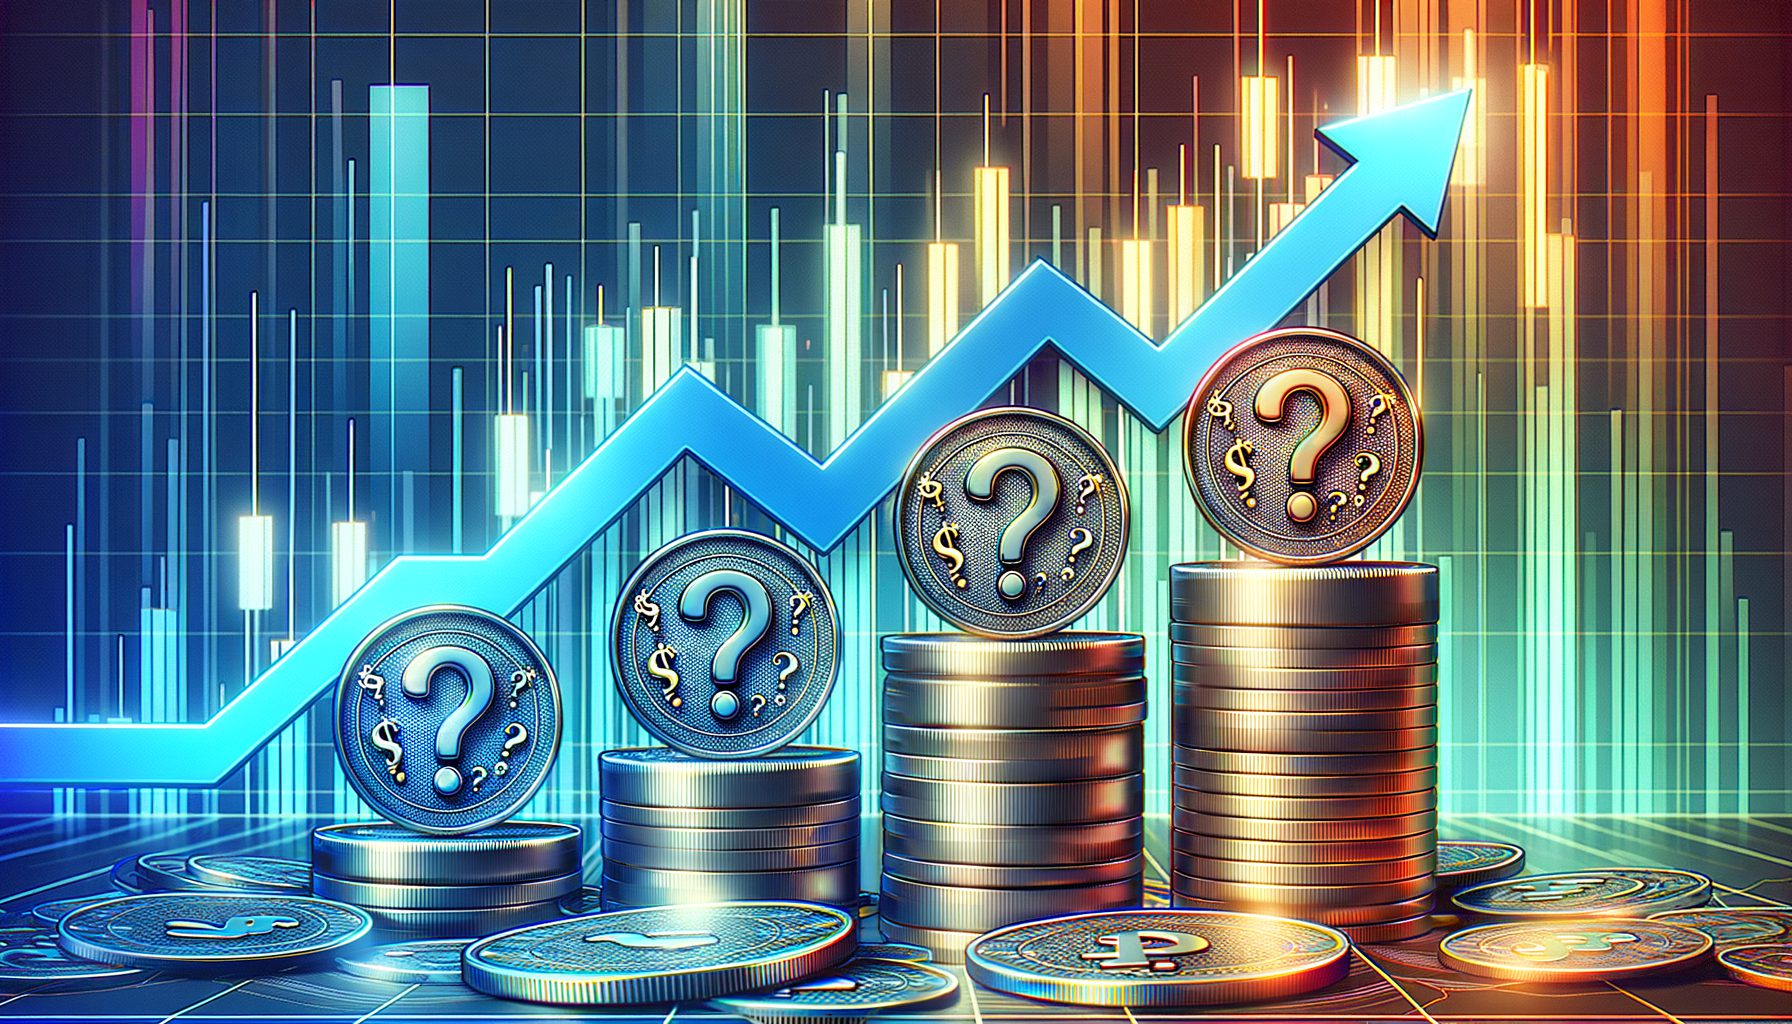 Top 5 Cryptocurrencies That Can Hit New ATH’s This Month